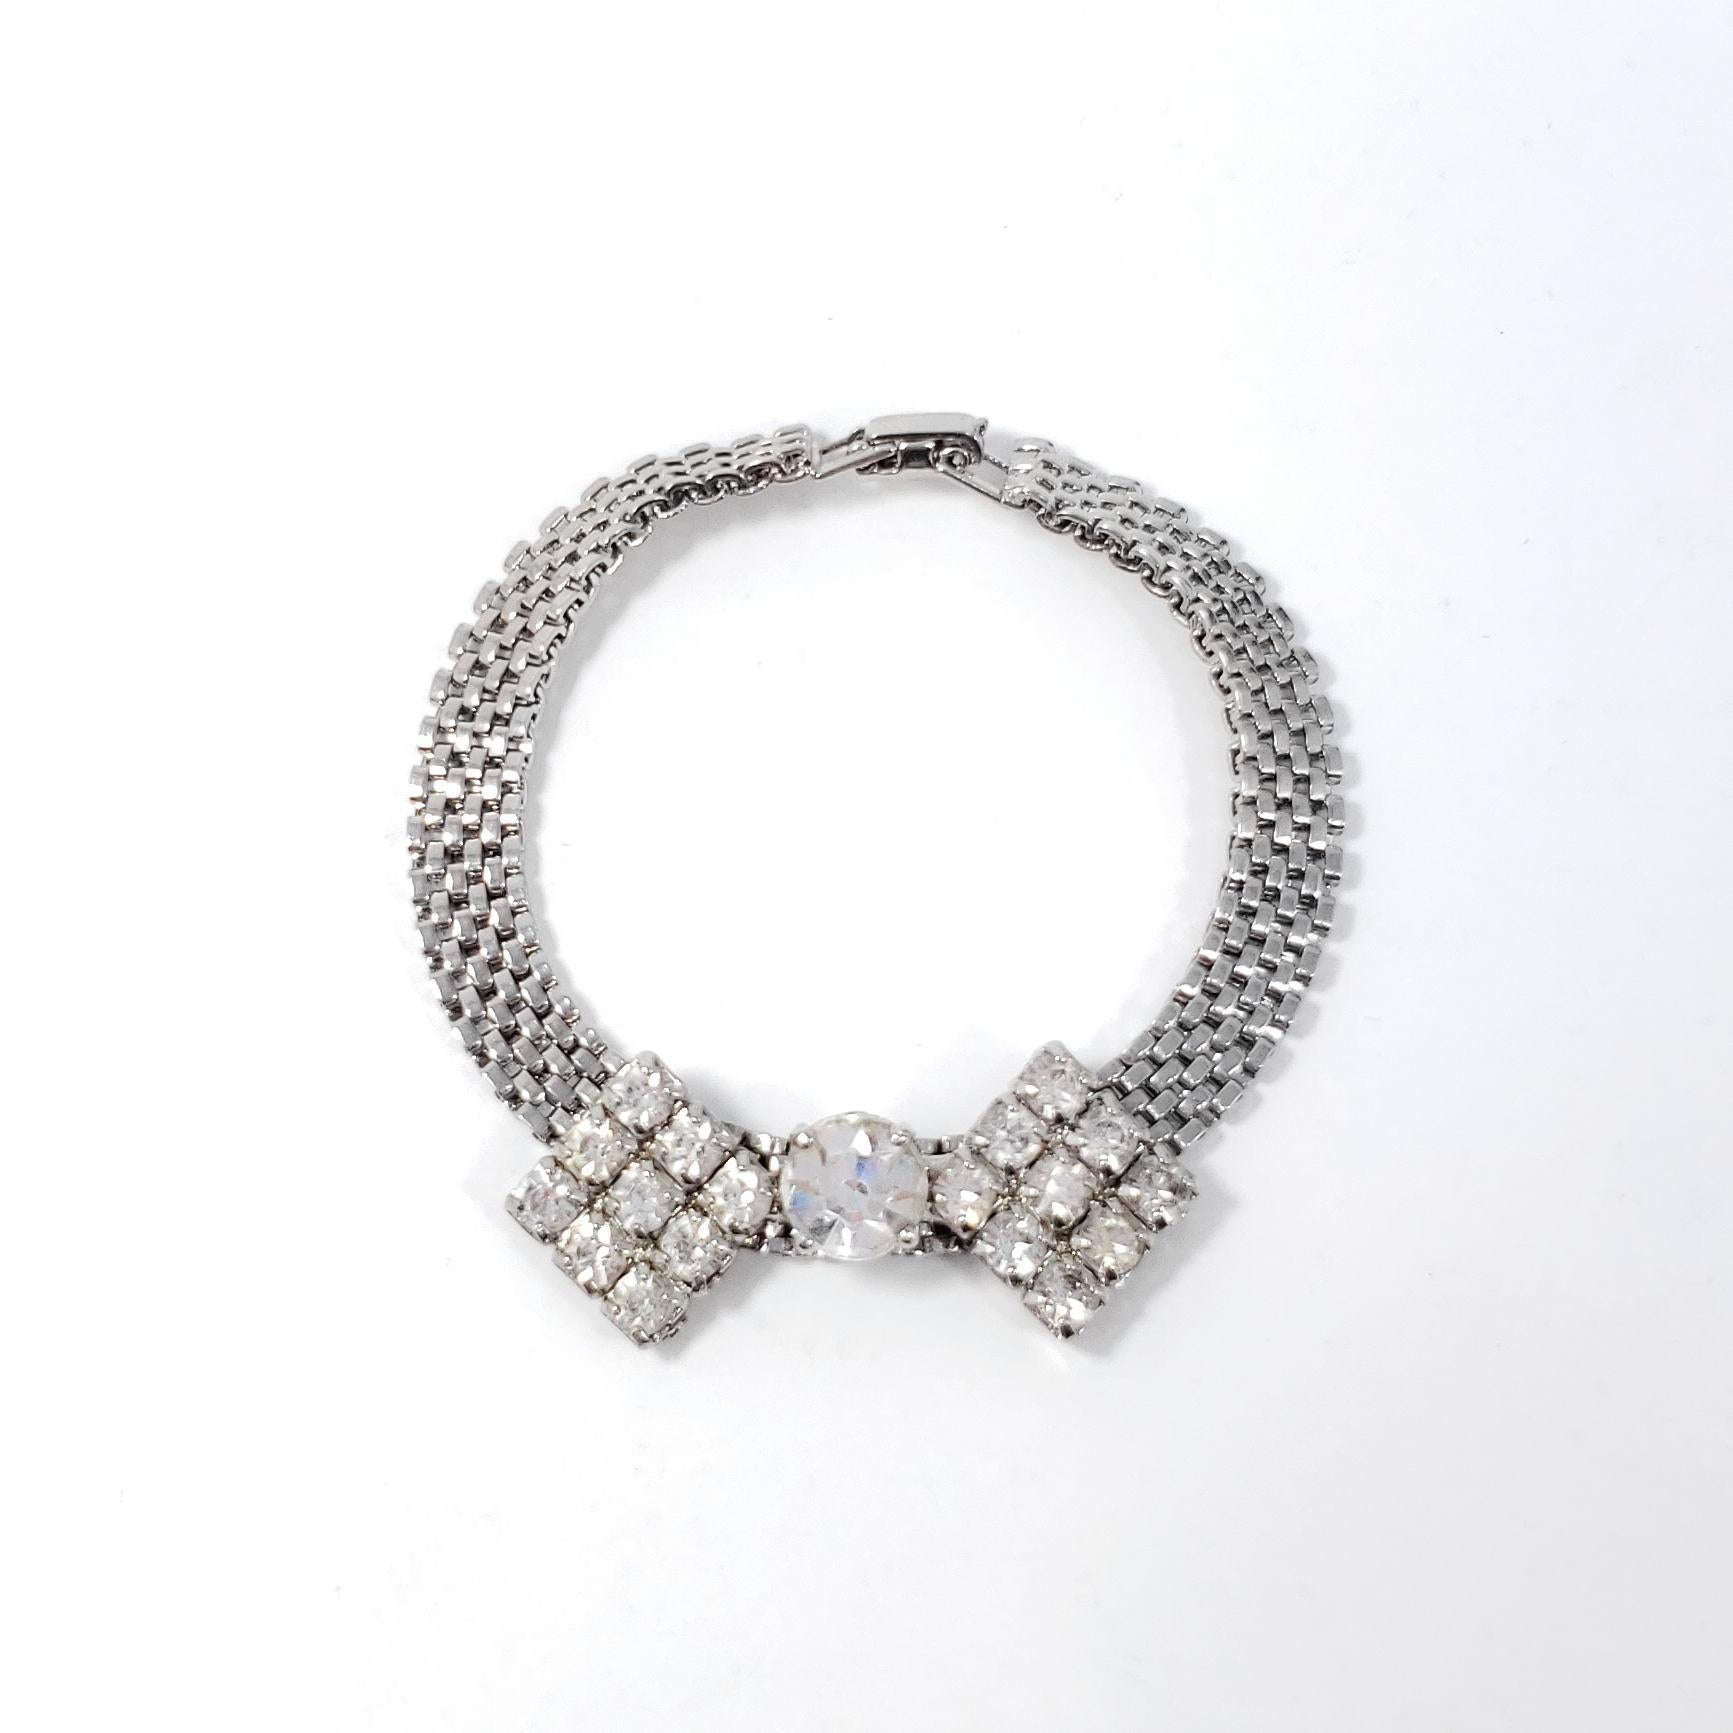 A bowtie accented with clear crystals, set on a silver-tone chain bracelet. The perfect touch of retro flair!

Circa 1950s.